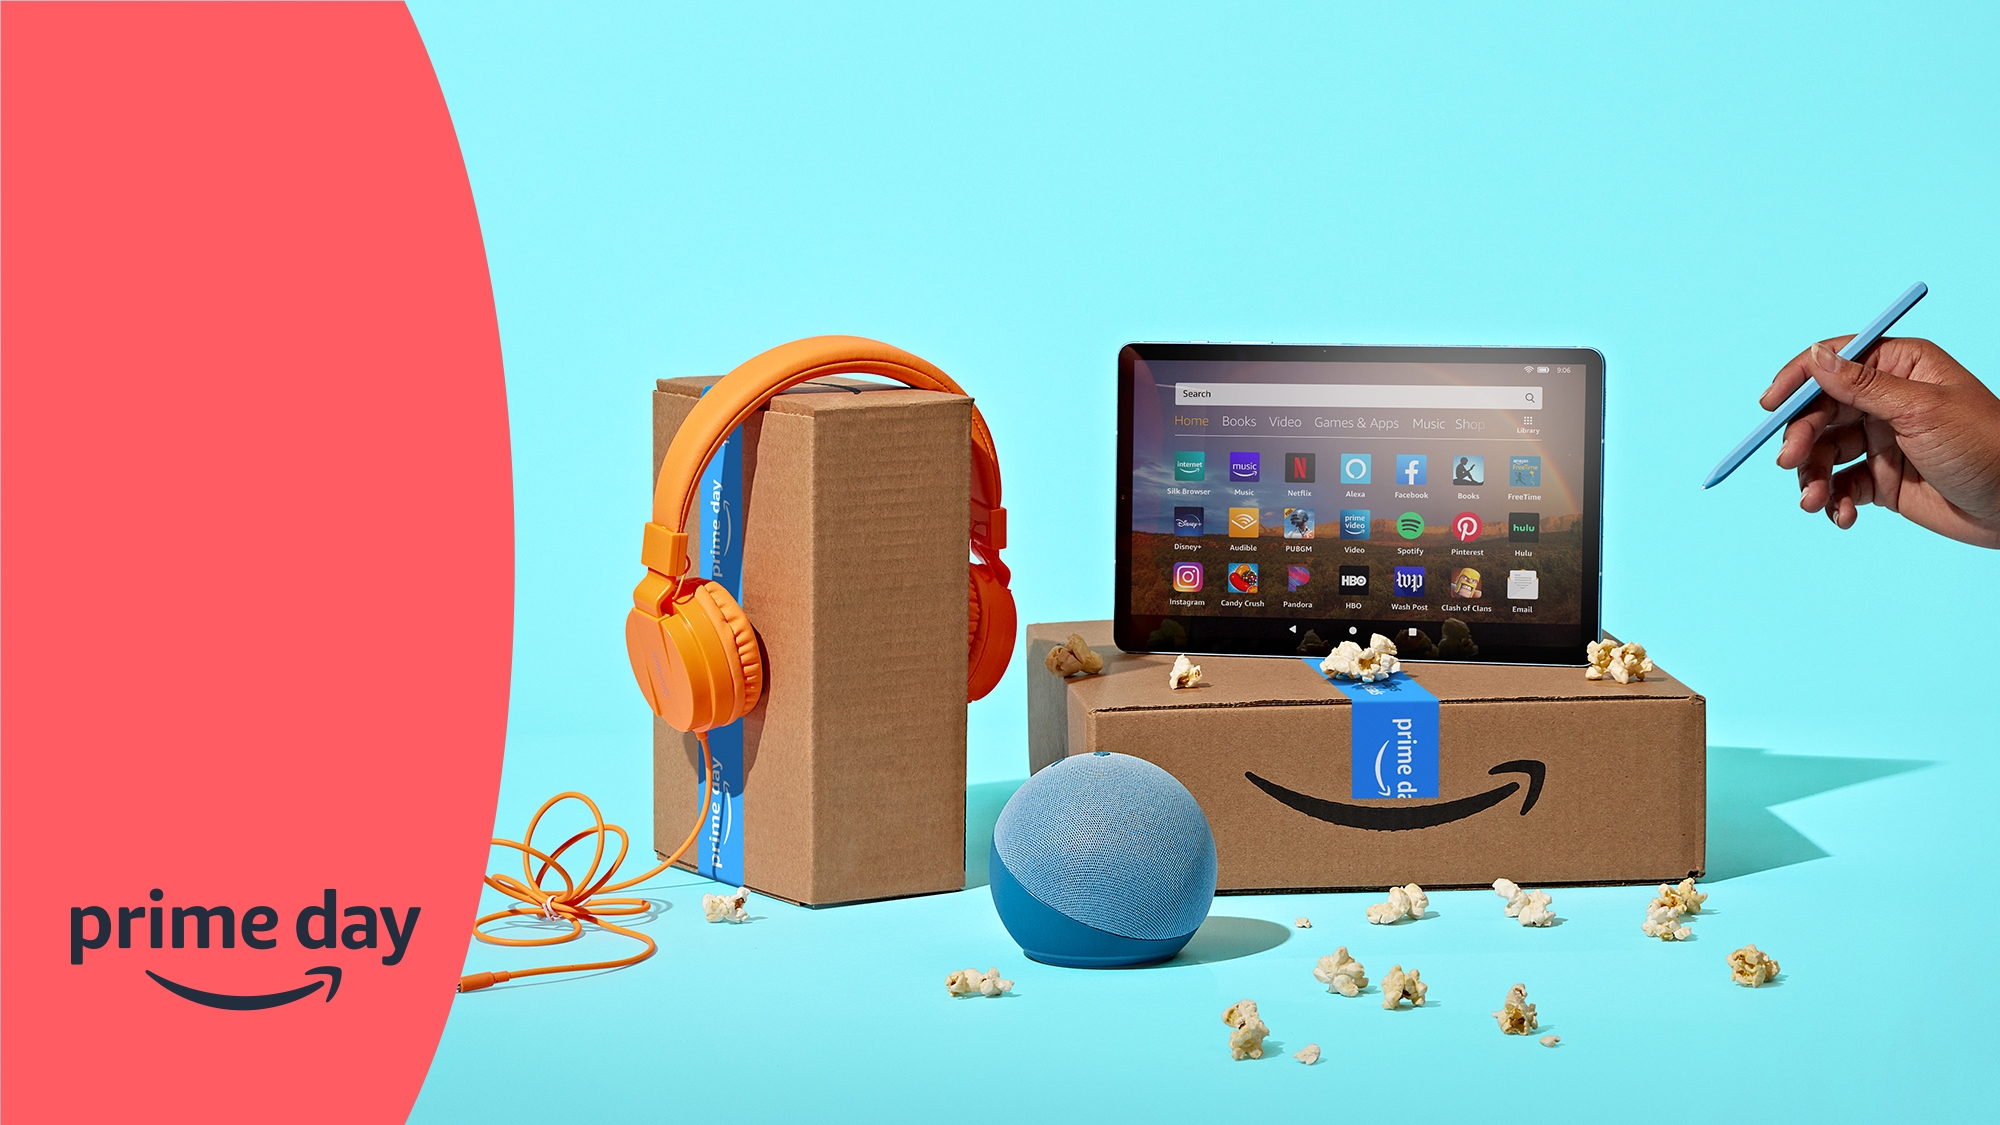 Graphic image of a speaker, headphones, and tablet for Prime Day.